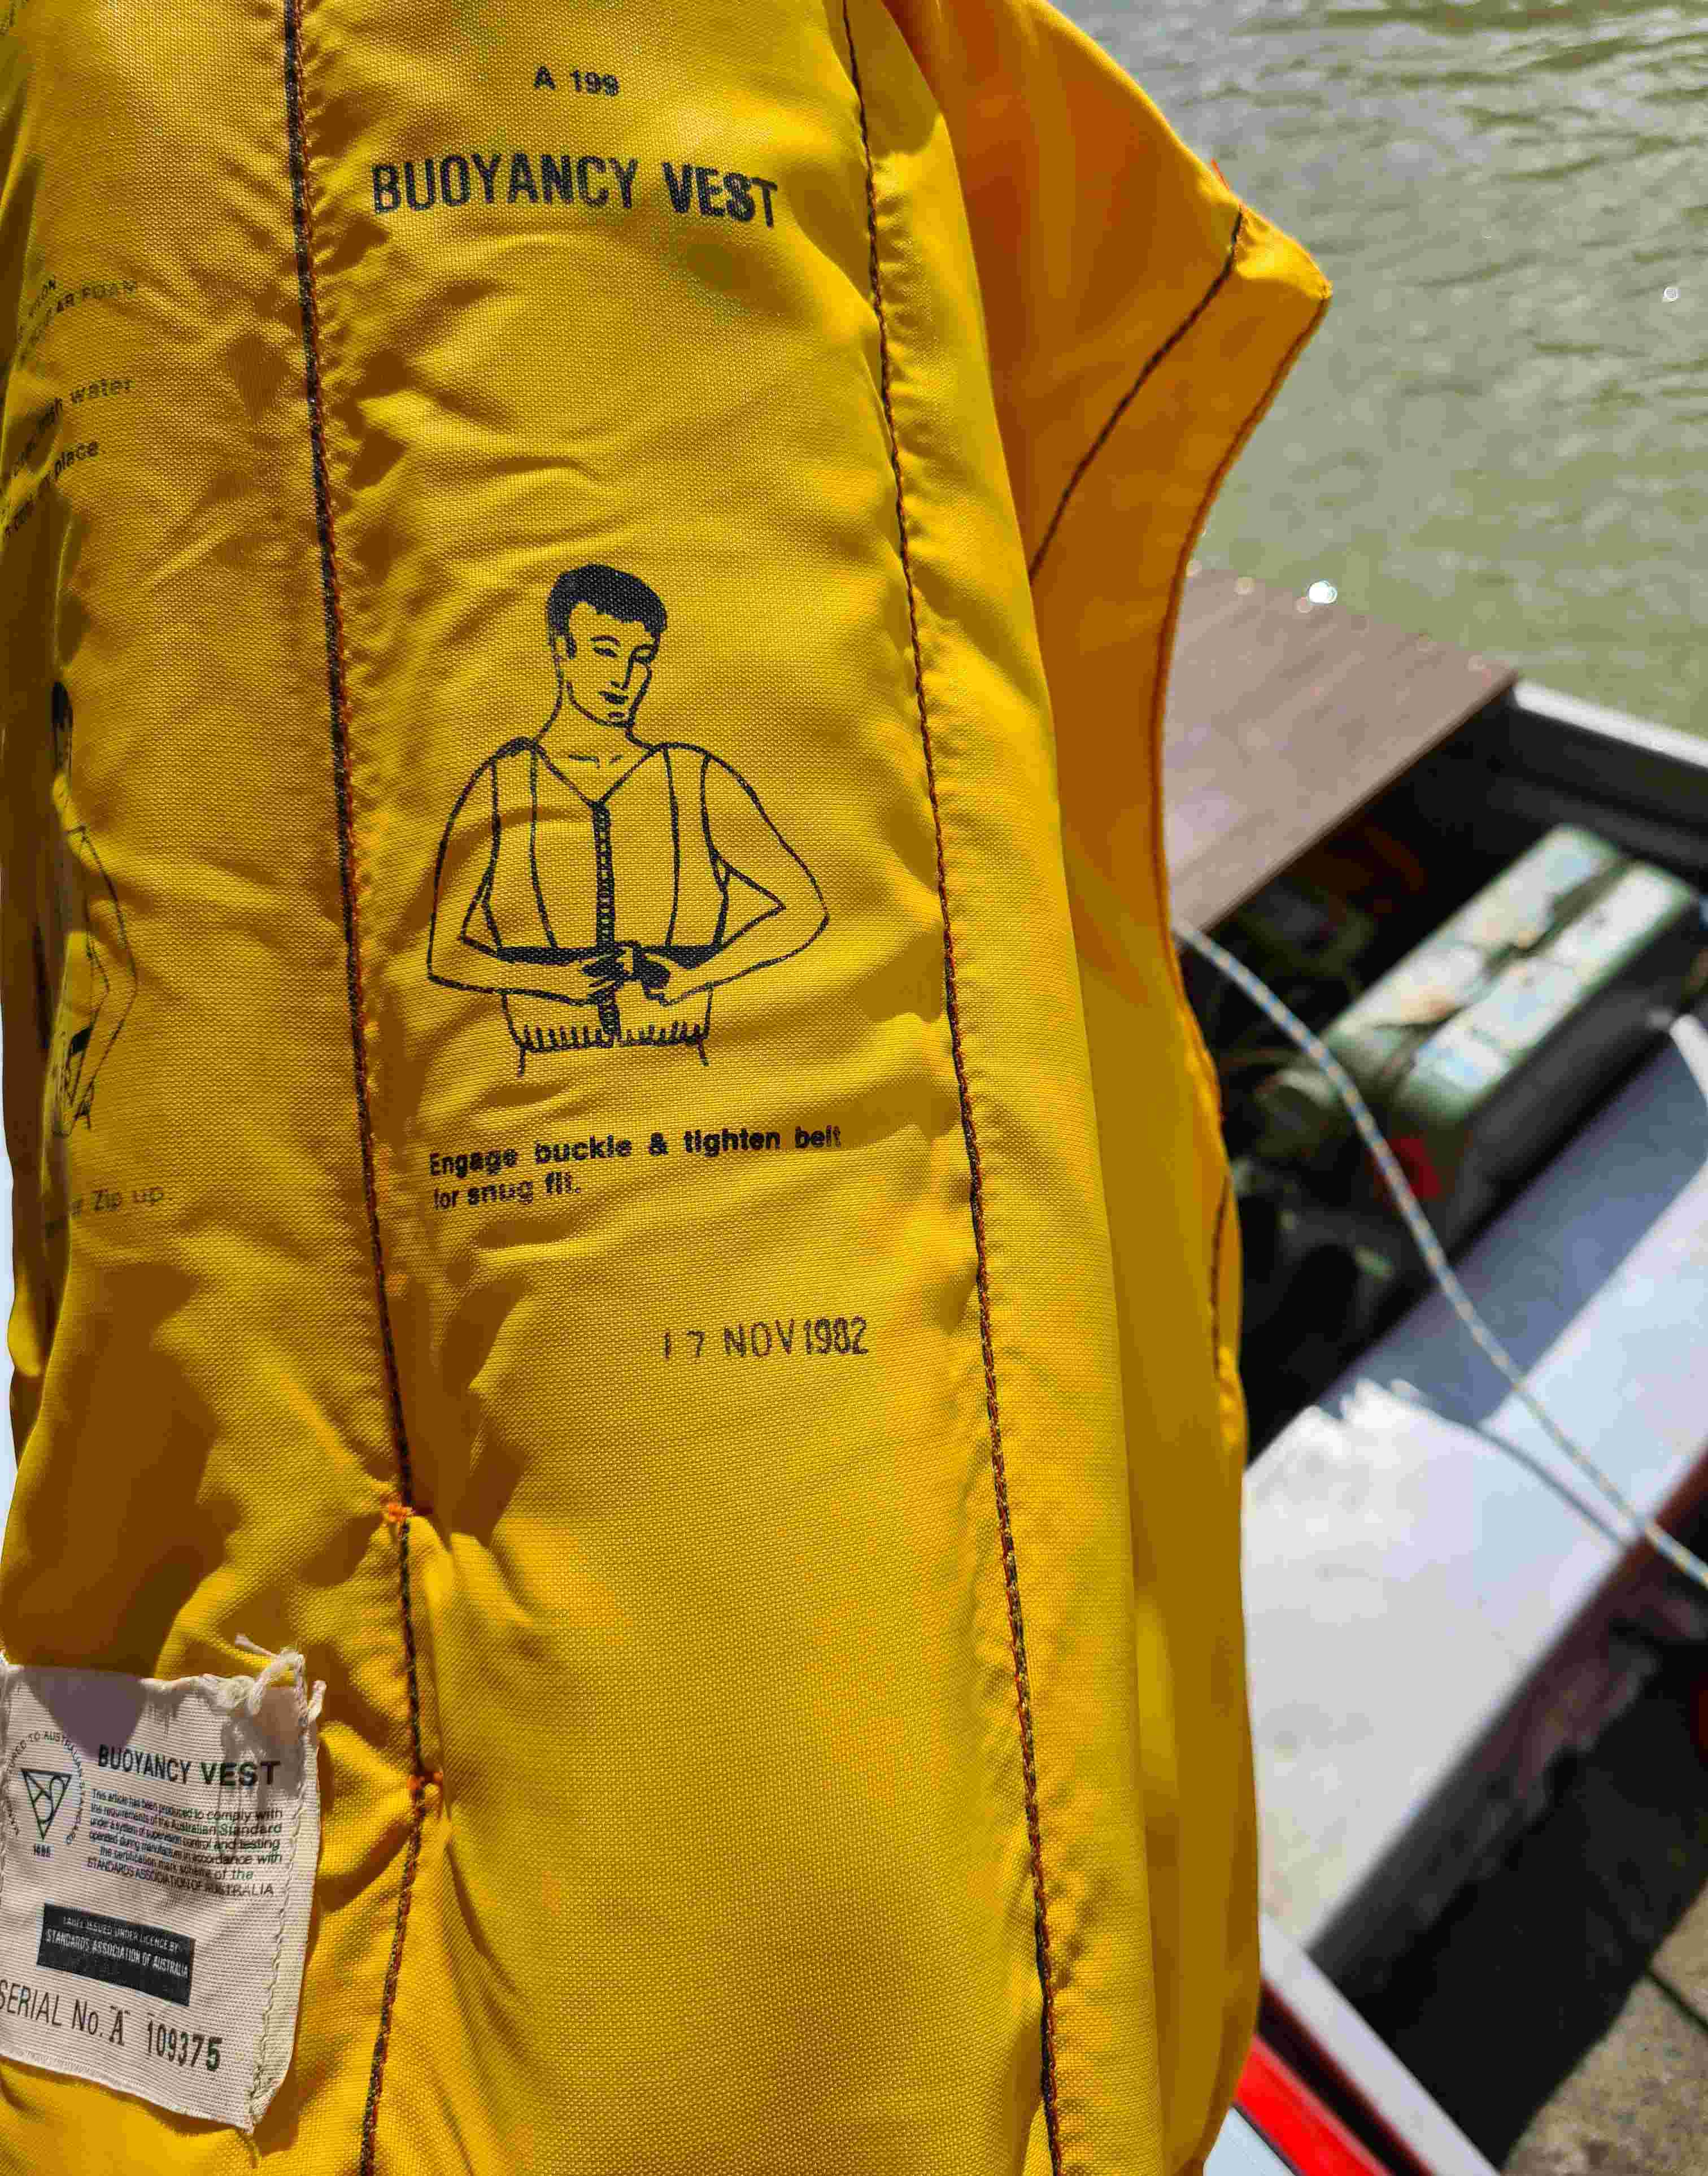 Clos up of an old yellow lifejacket showing a date of November 1982